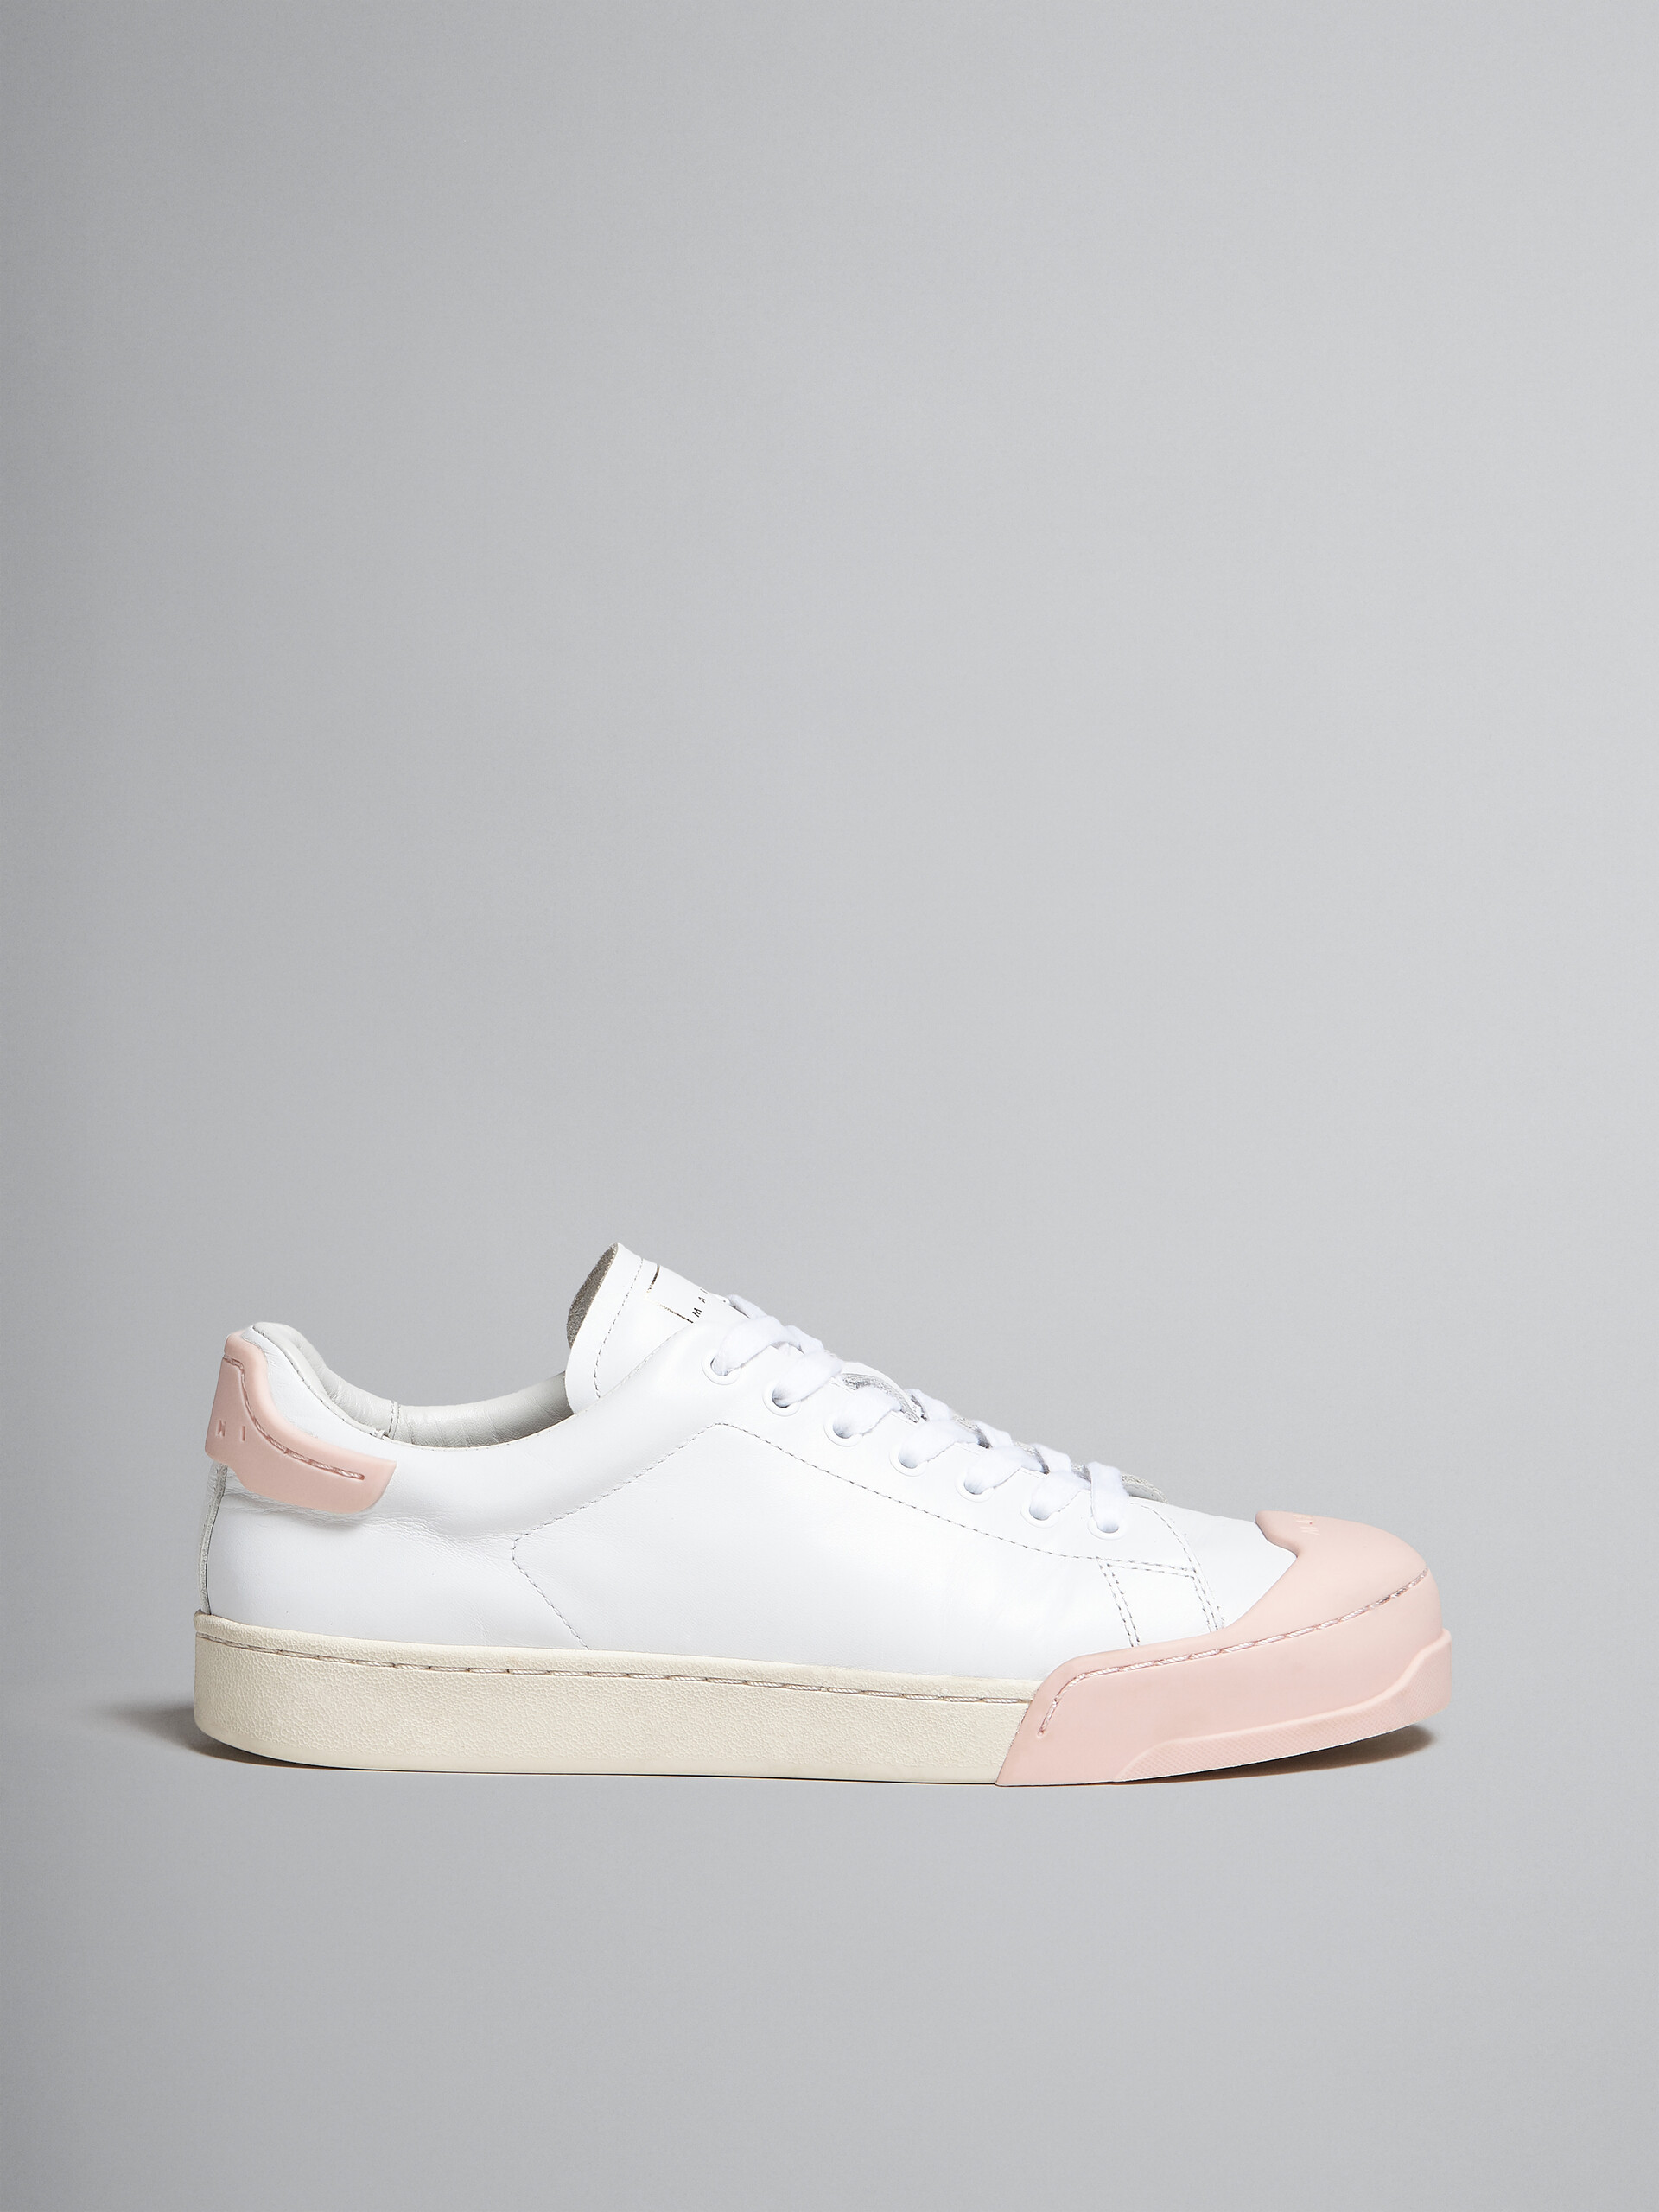 Dada Bumper sneaker in white and yellow leather - Sneakers - Image 1